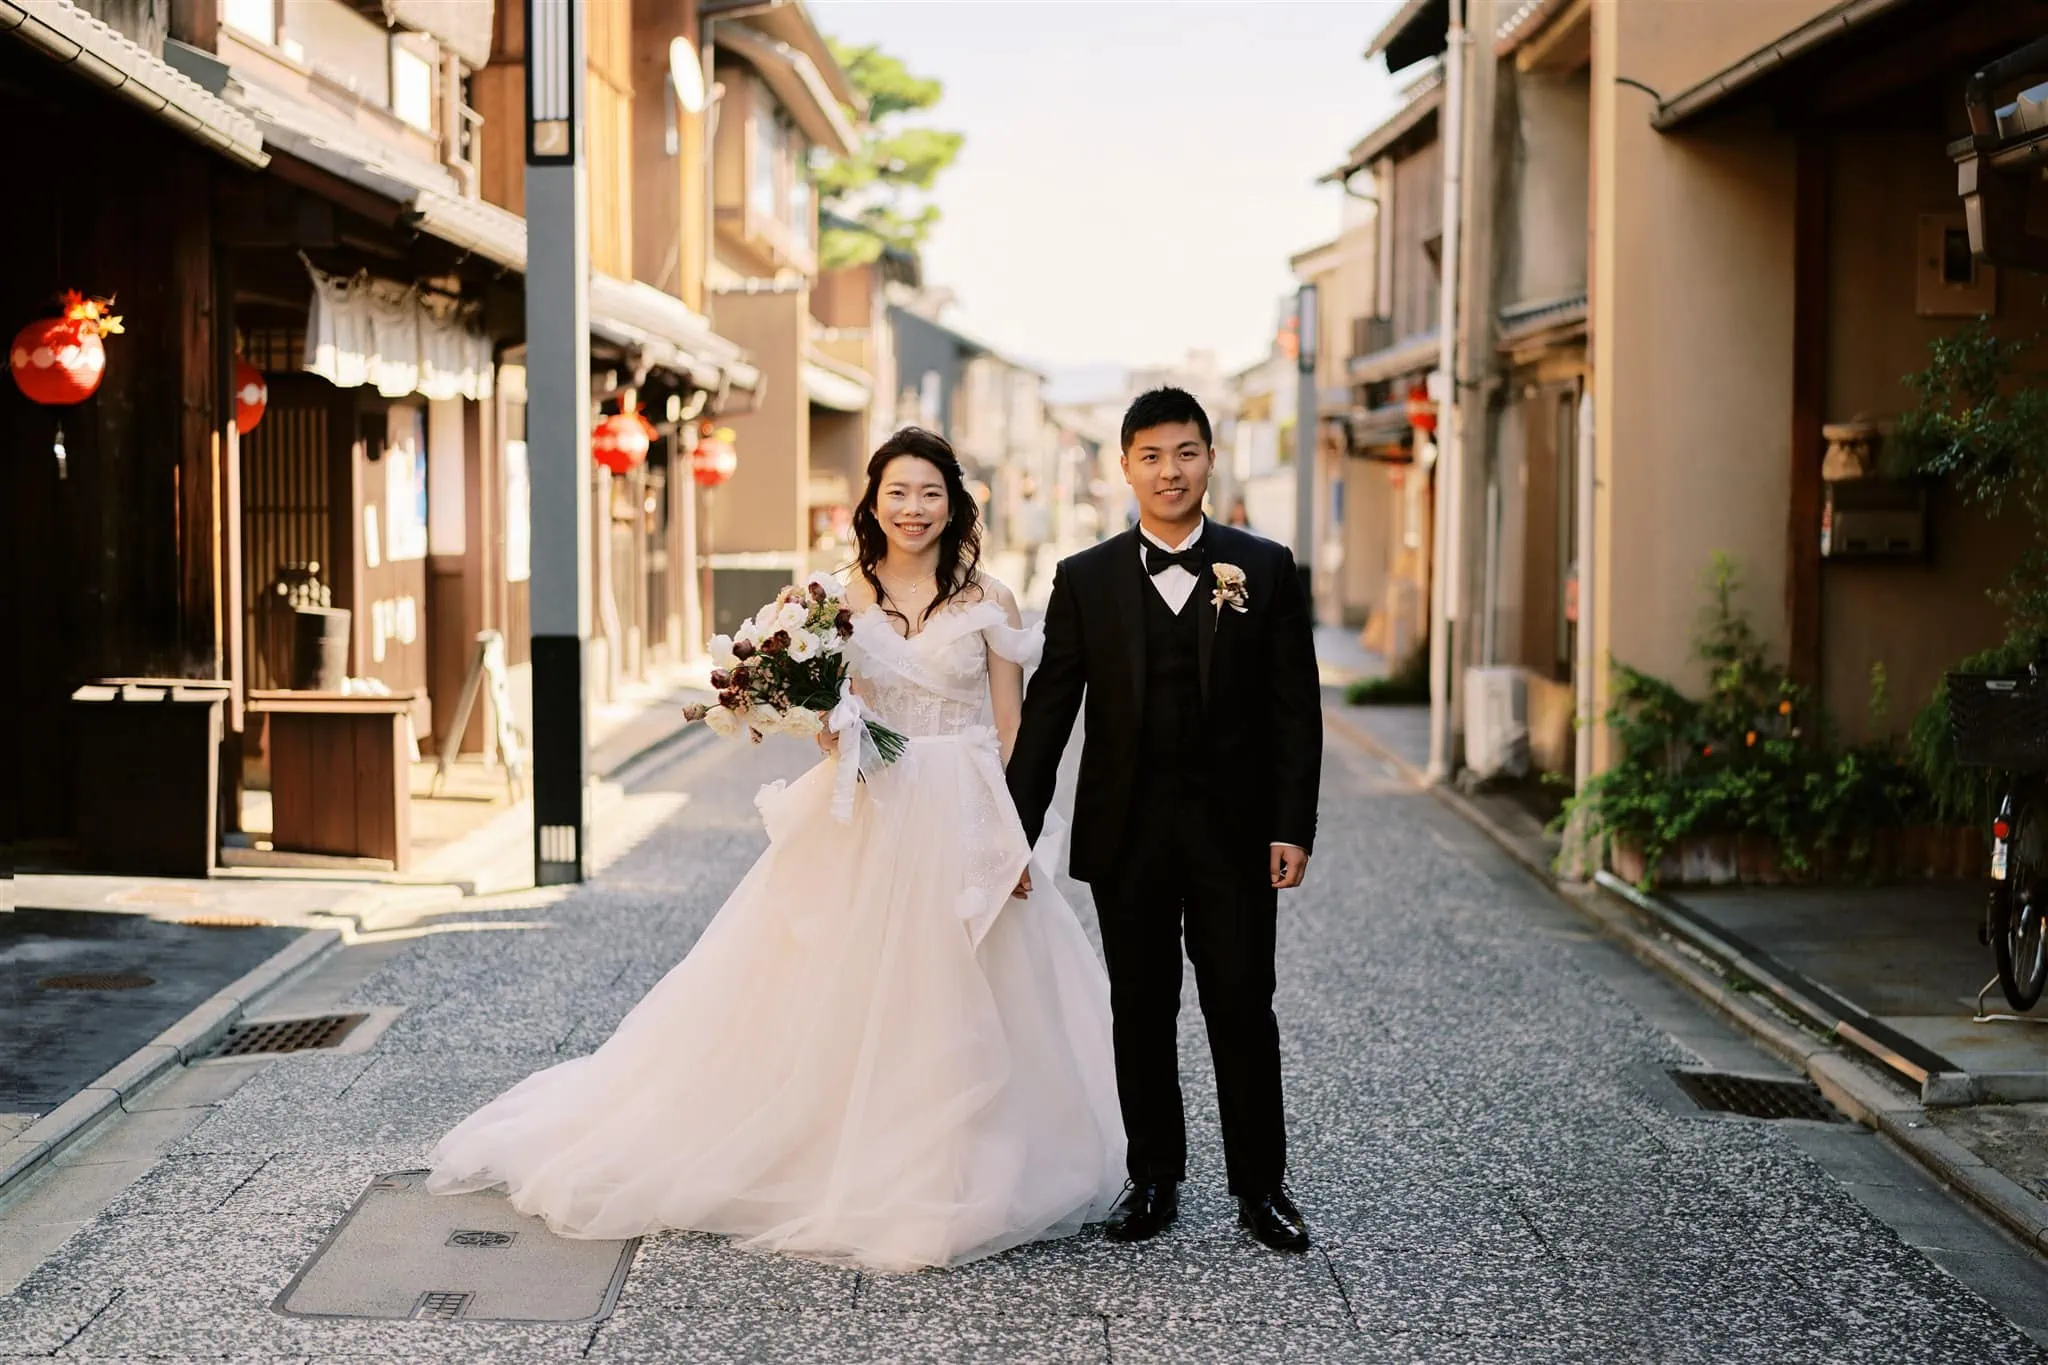 Kyoto Tokyo Japan Elopement Wedding Photographer, Planner & Videographer | A bride and groom strolling down a charming narrow alleyway captured by a skilled Japan elopement photographer.